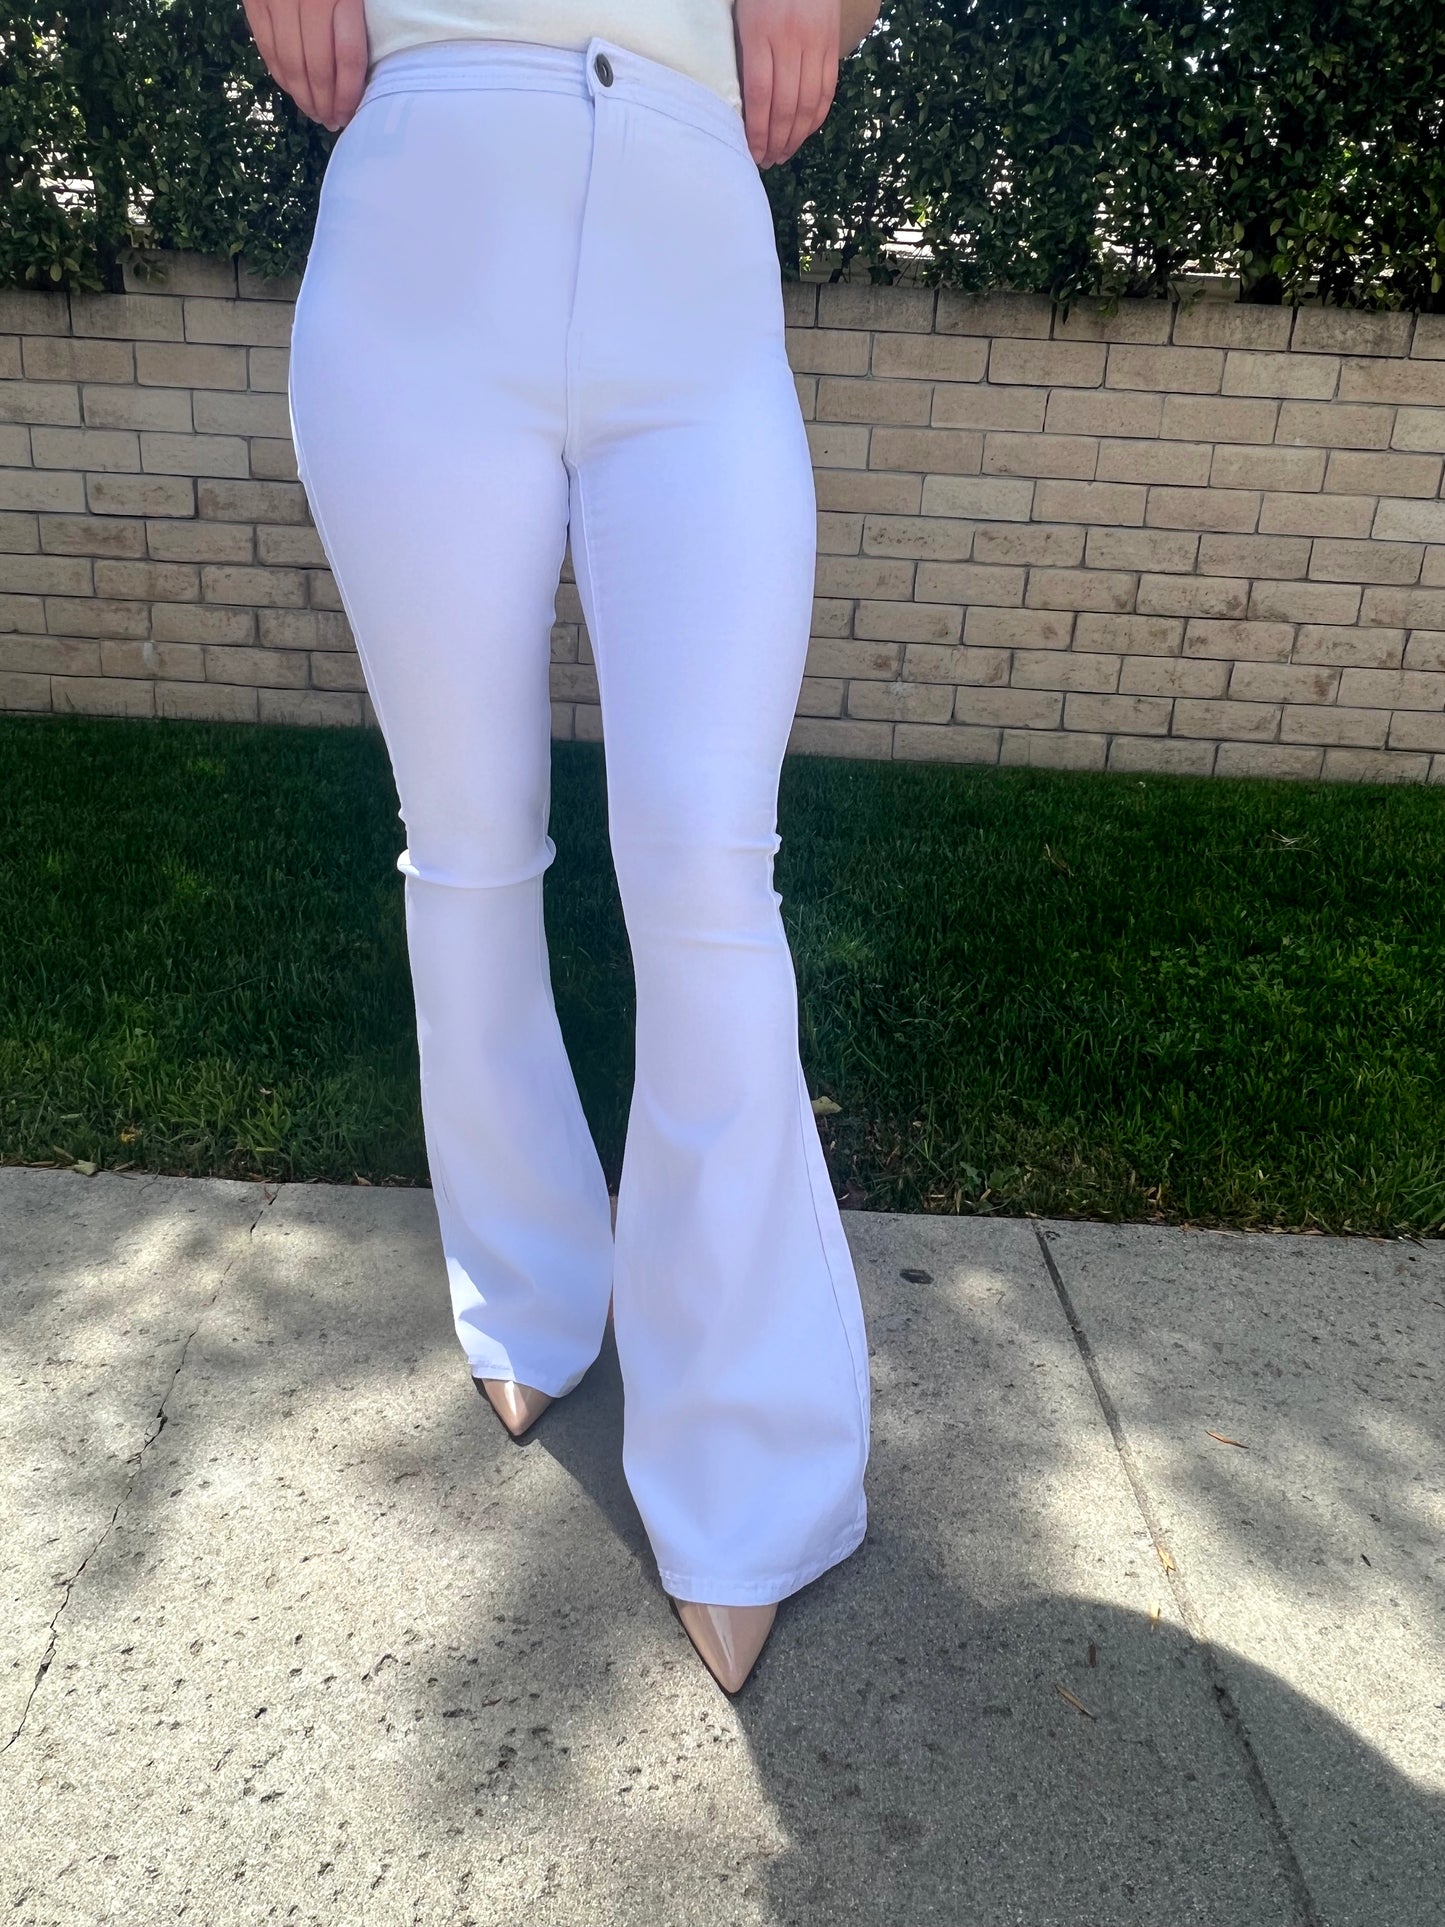 Bell Bottom Pants - Style by me